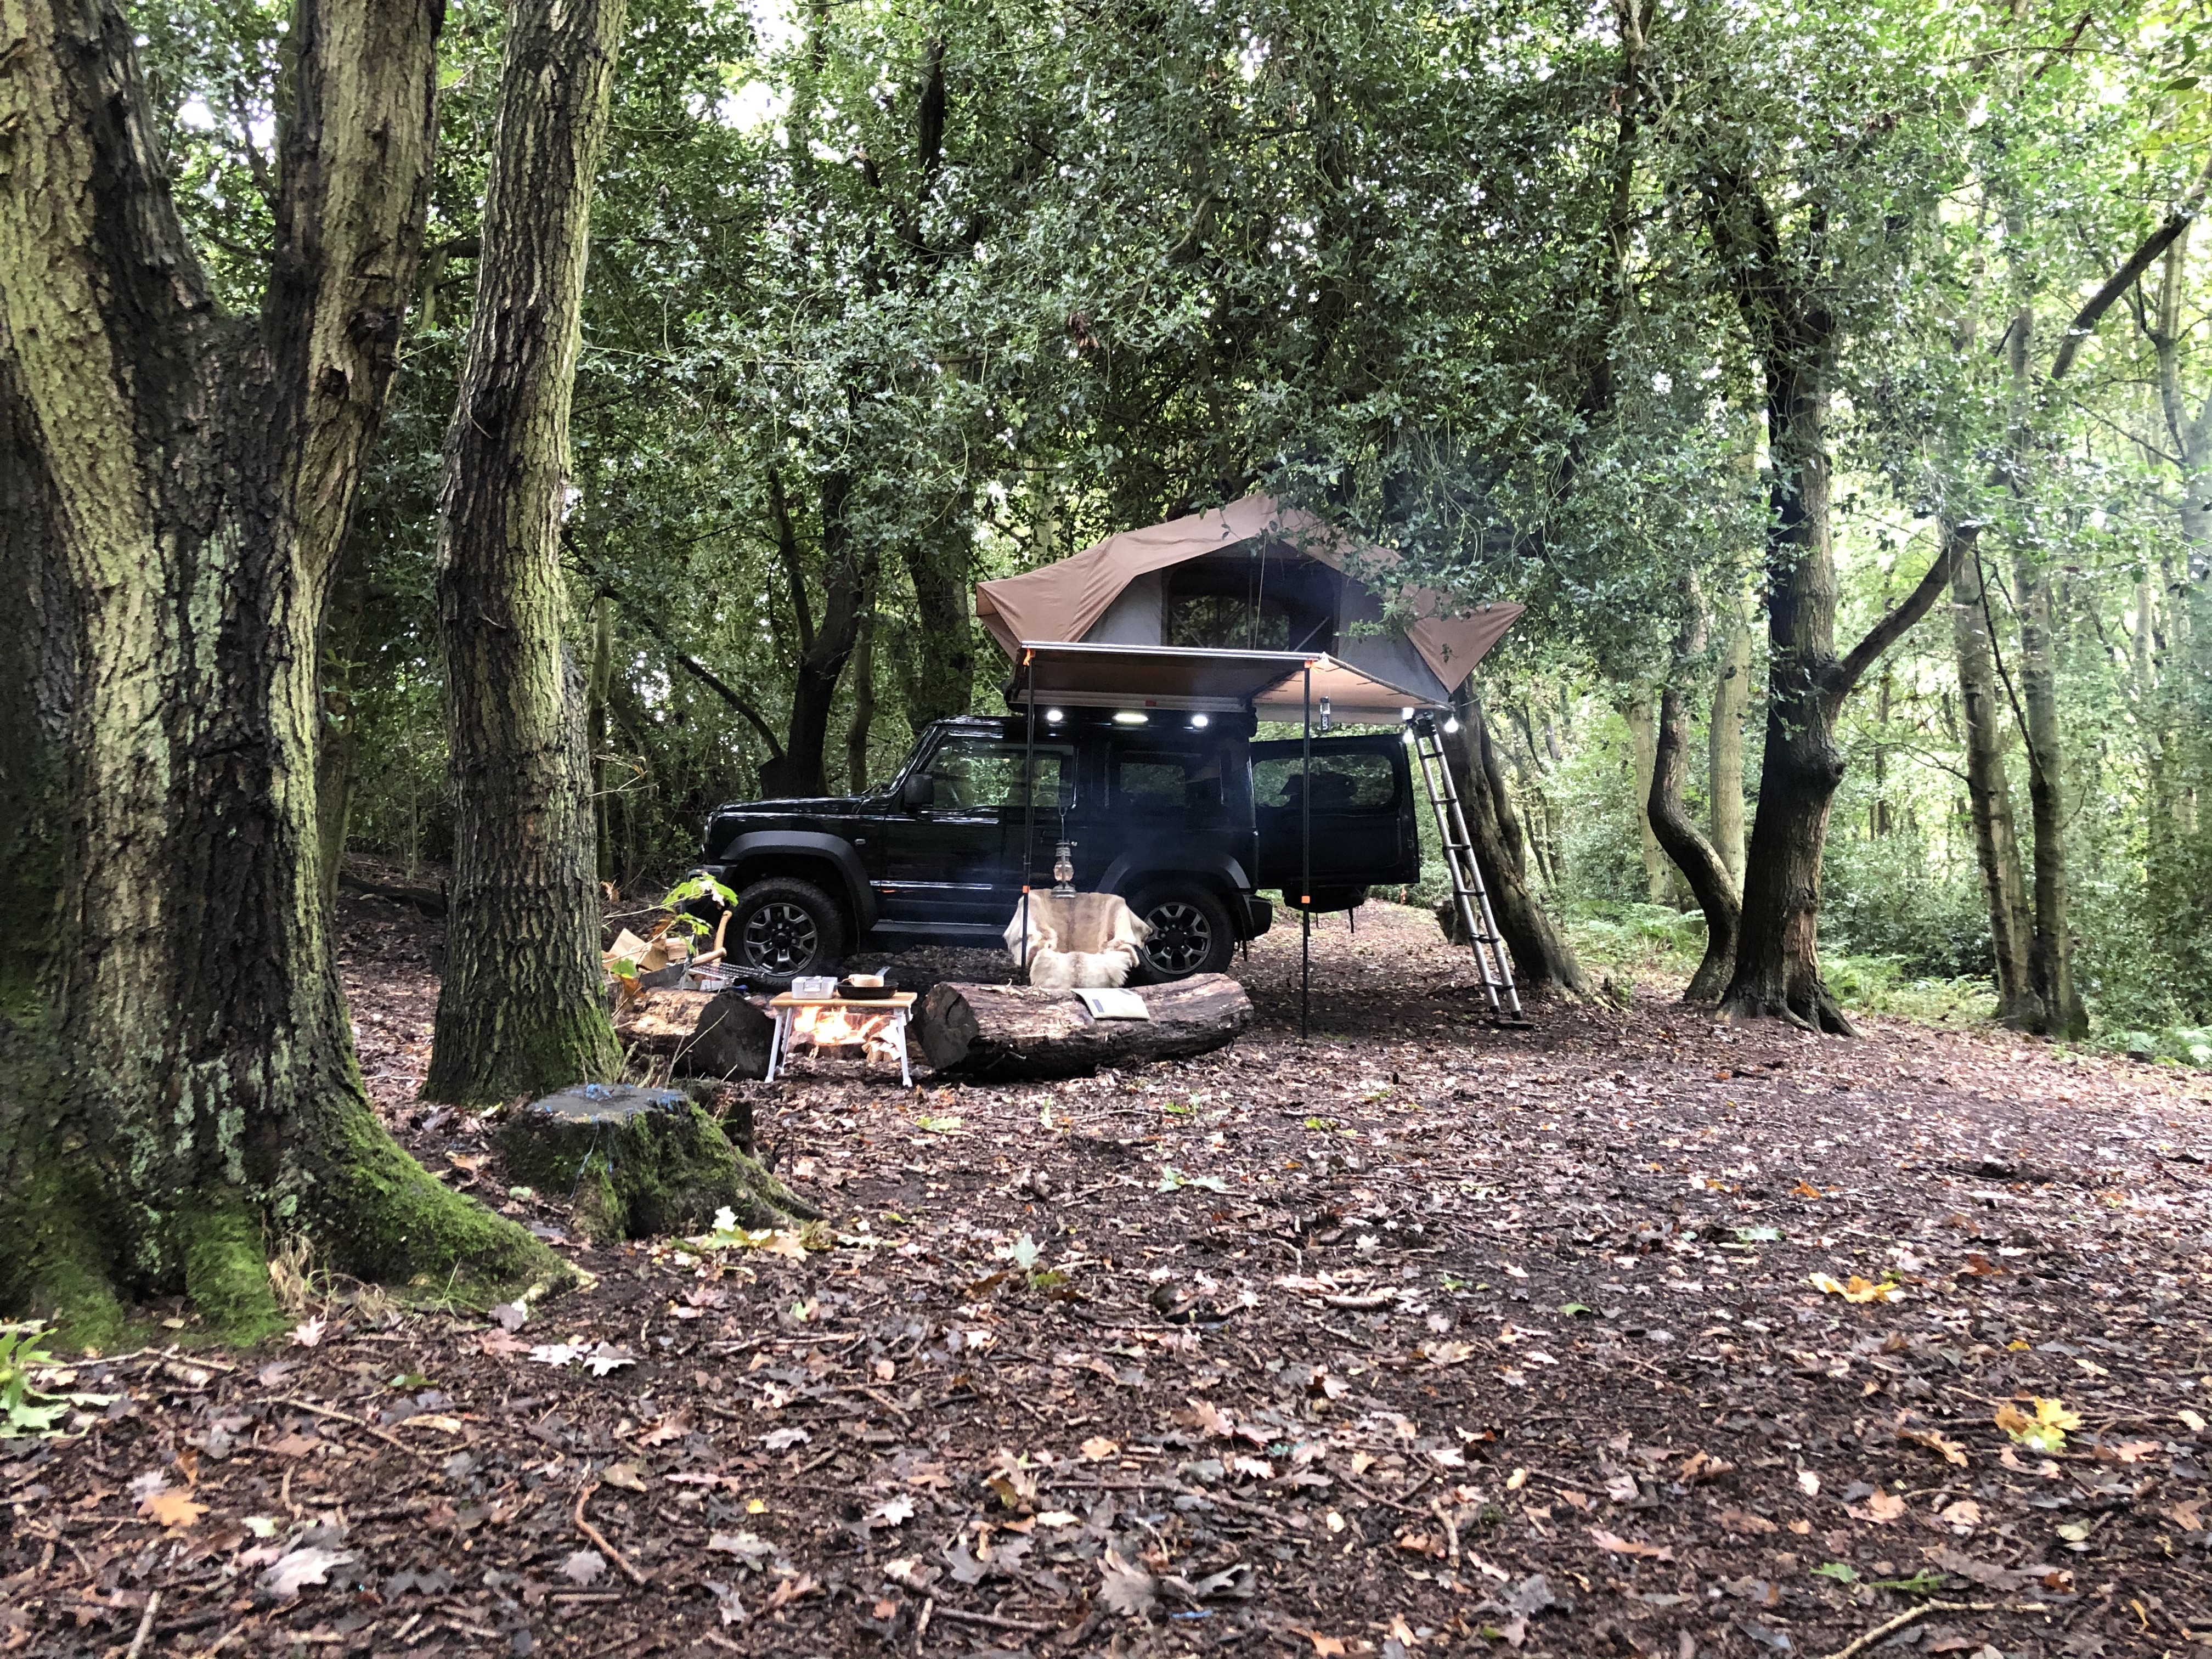 Woods camping